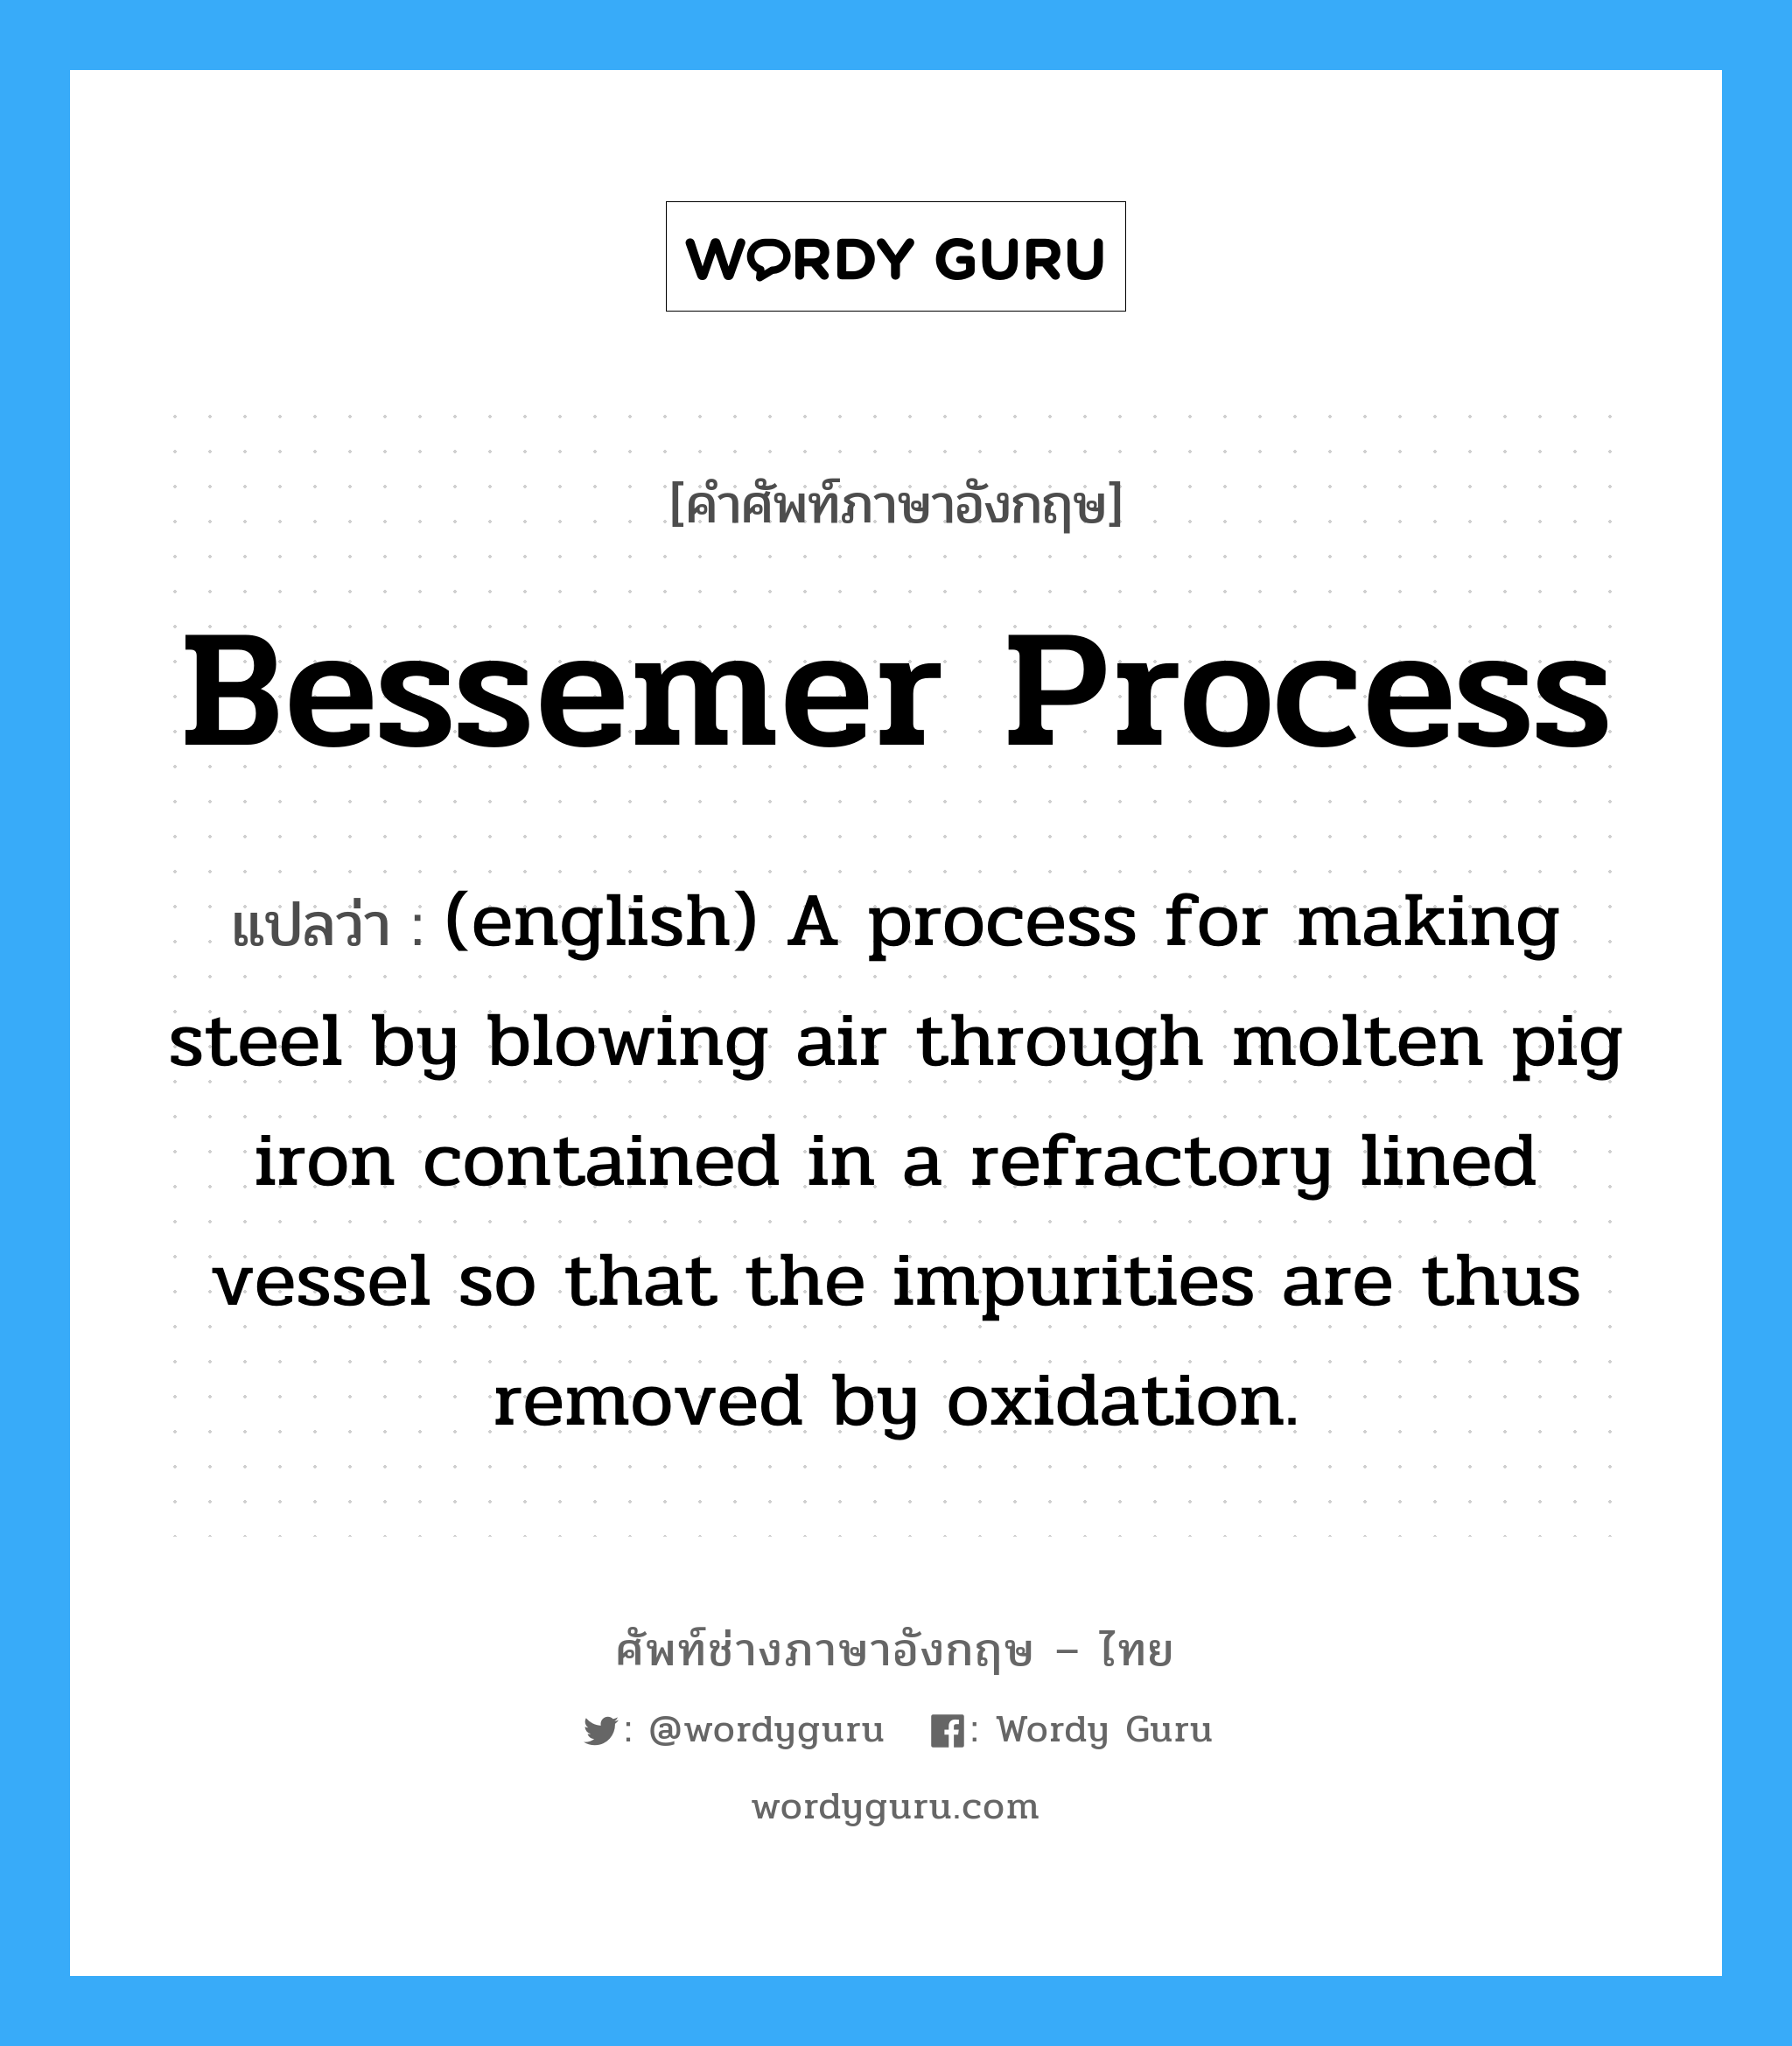 Bessemer Process แปลว่า?, คำศัพท์ช่างภาษาอังกฤษ - ไทย Bessemer Process คำศัพท์ภาษาอังกฤษ Bessemer Process แปลว่า (english) A process for making steel by blowing air through molten pig iron contained in a refractory lined vessel so that the impurities are thus removed by oxidation.